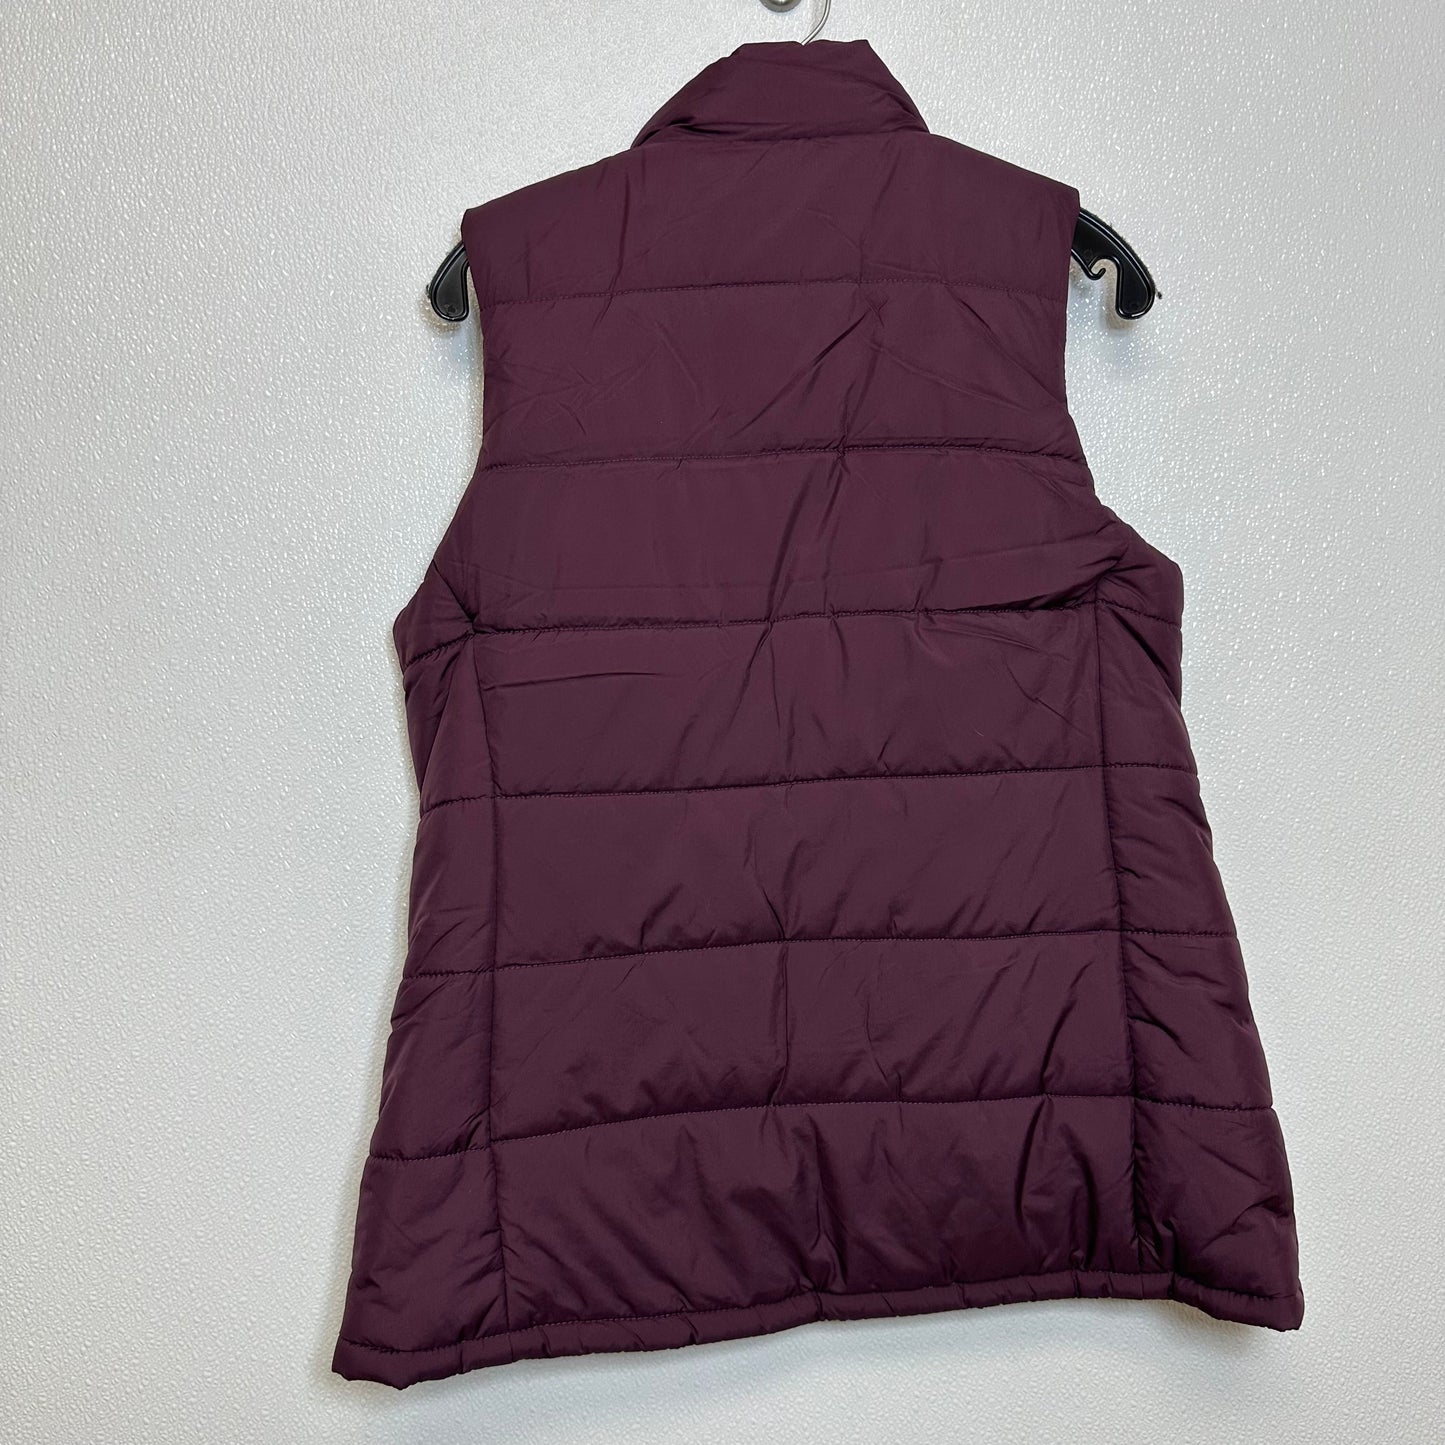 Vest Other By Amazon Essentials  Size: M